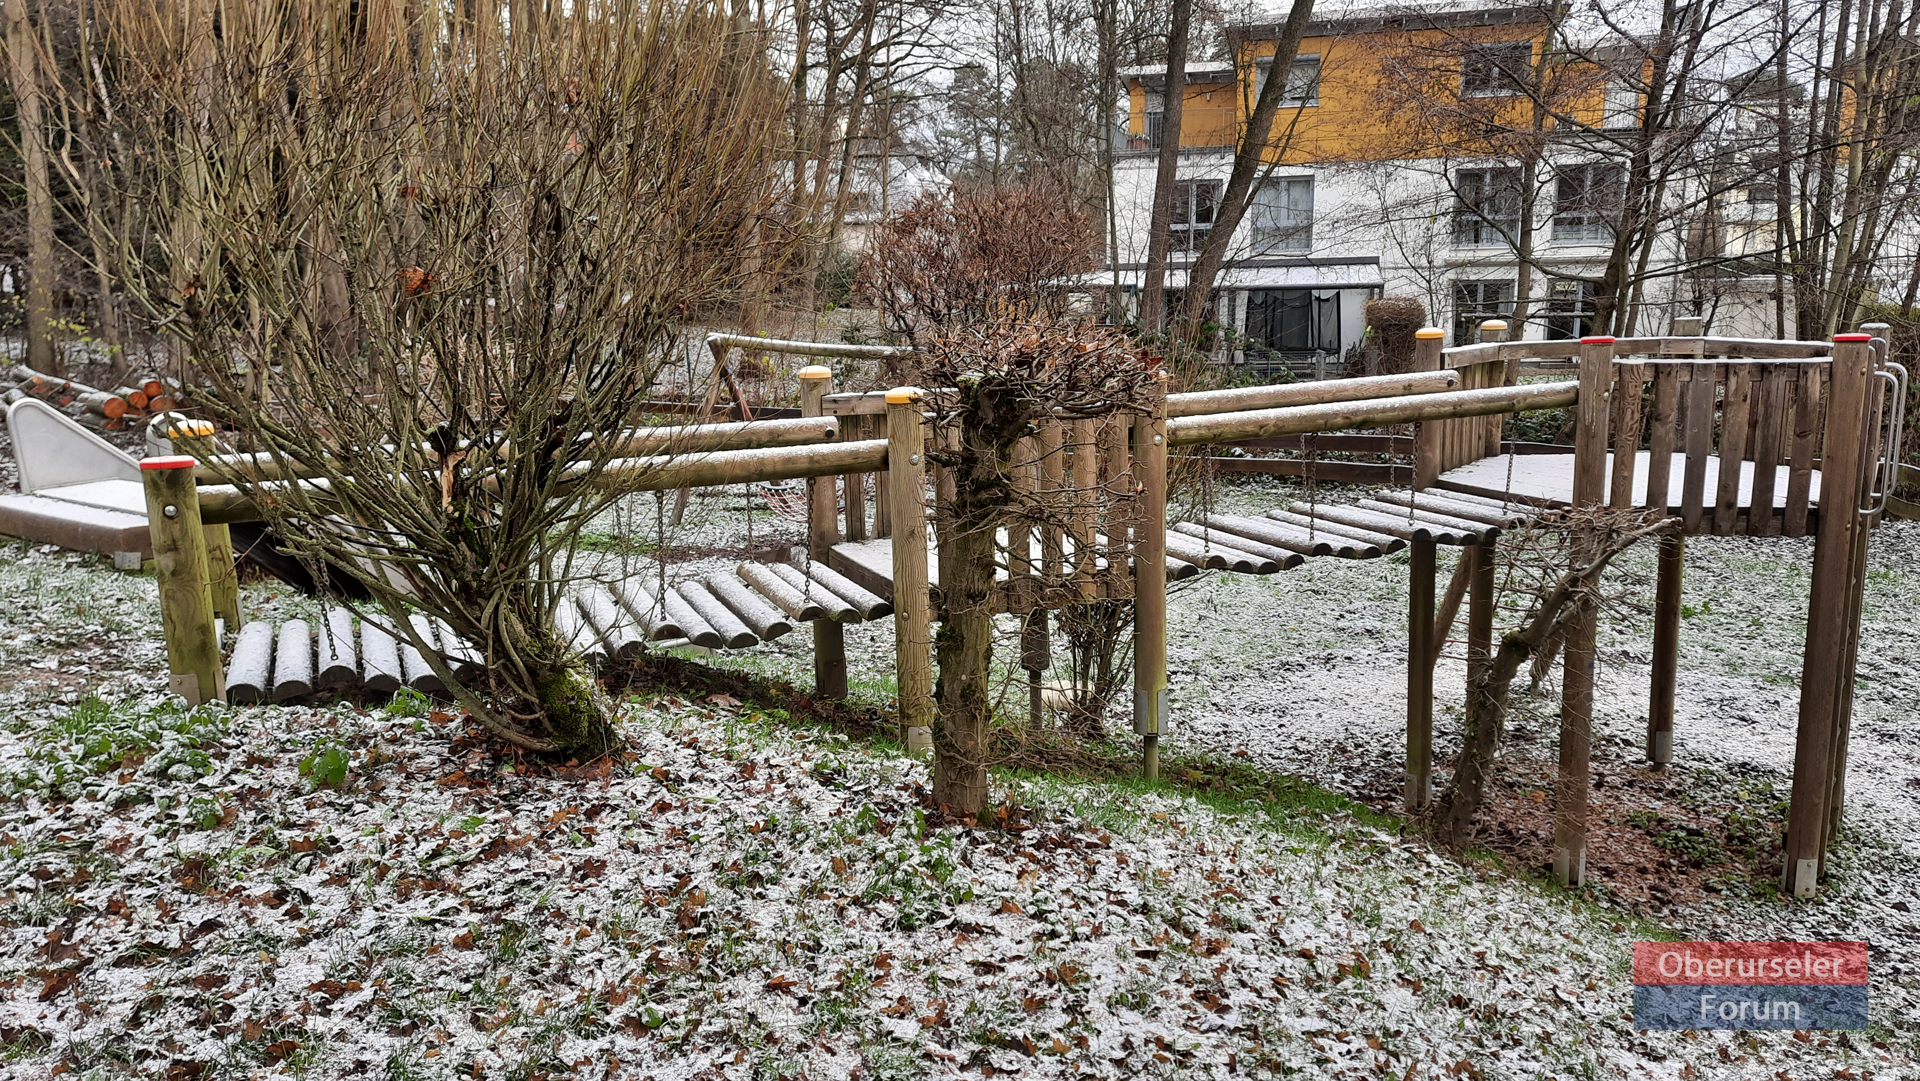 A playground in Oberursel with light snow